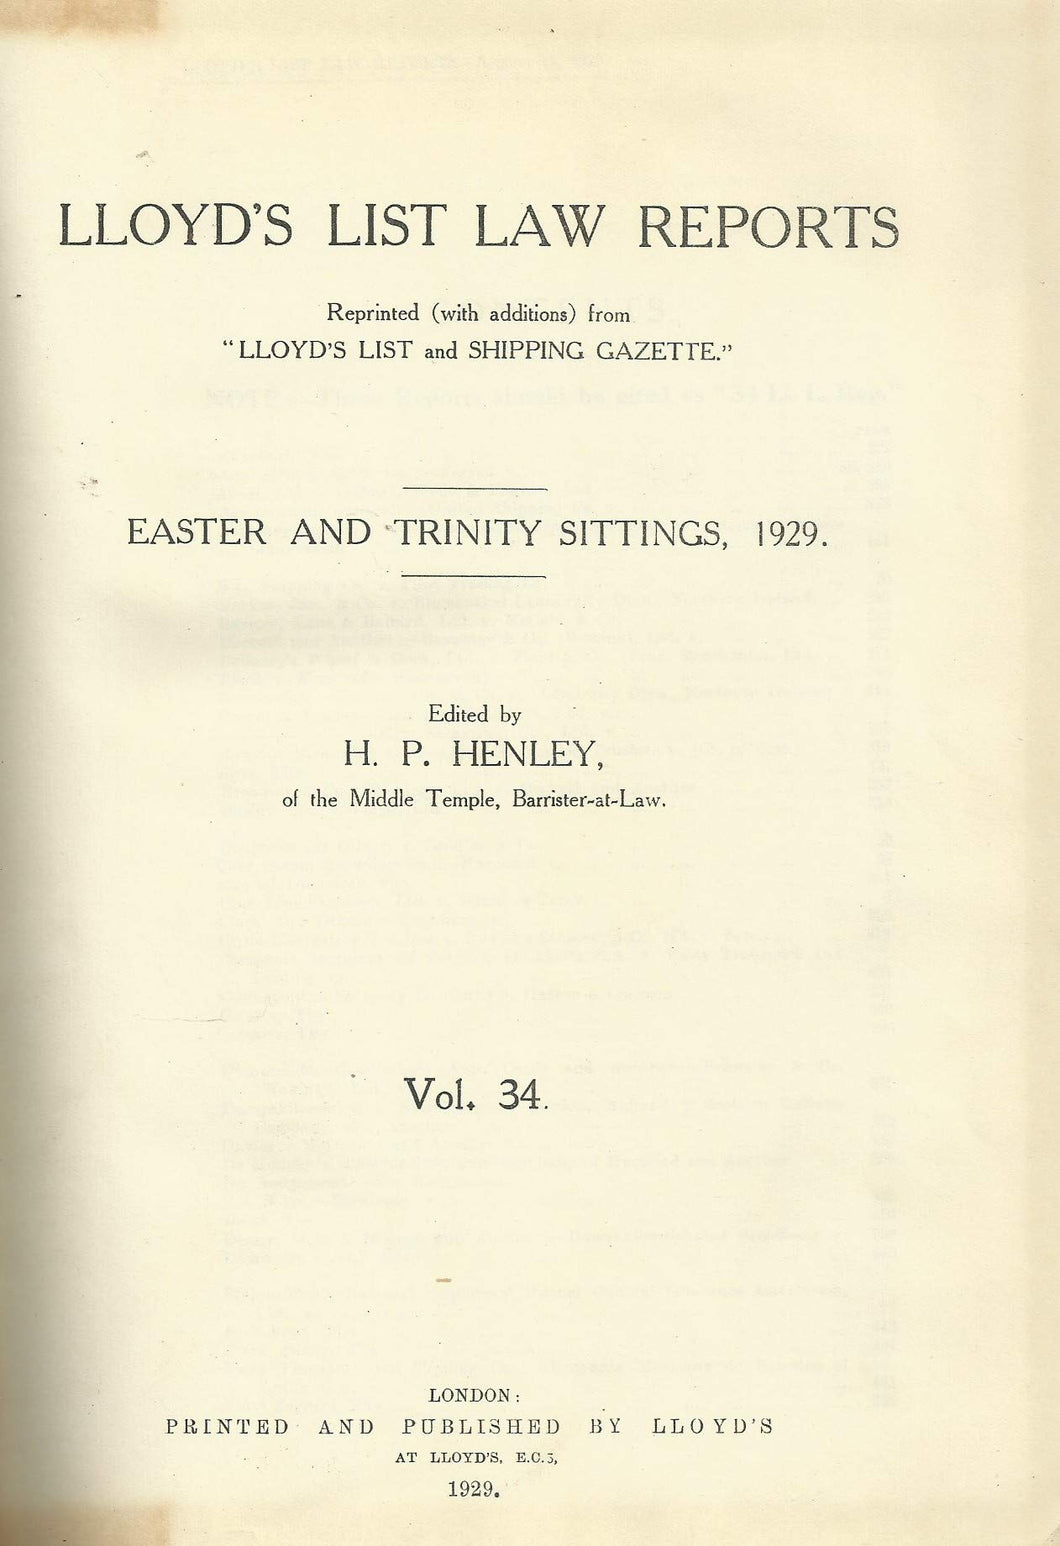 Lloyd's List Law Reports - Easter and Trinity Sittings, 1929, Vol 34